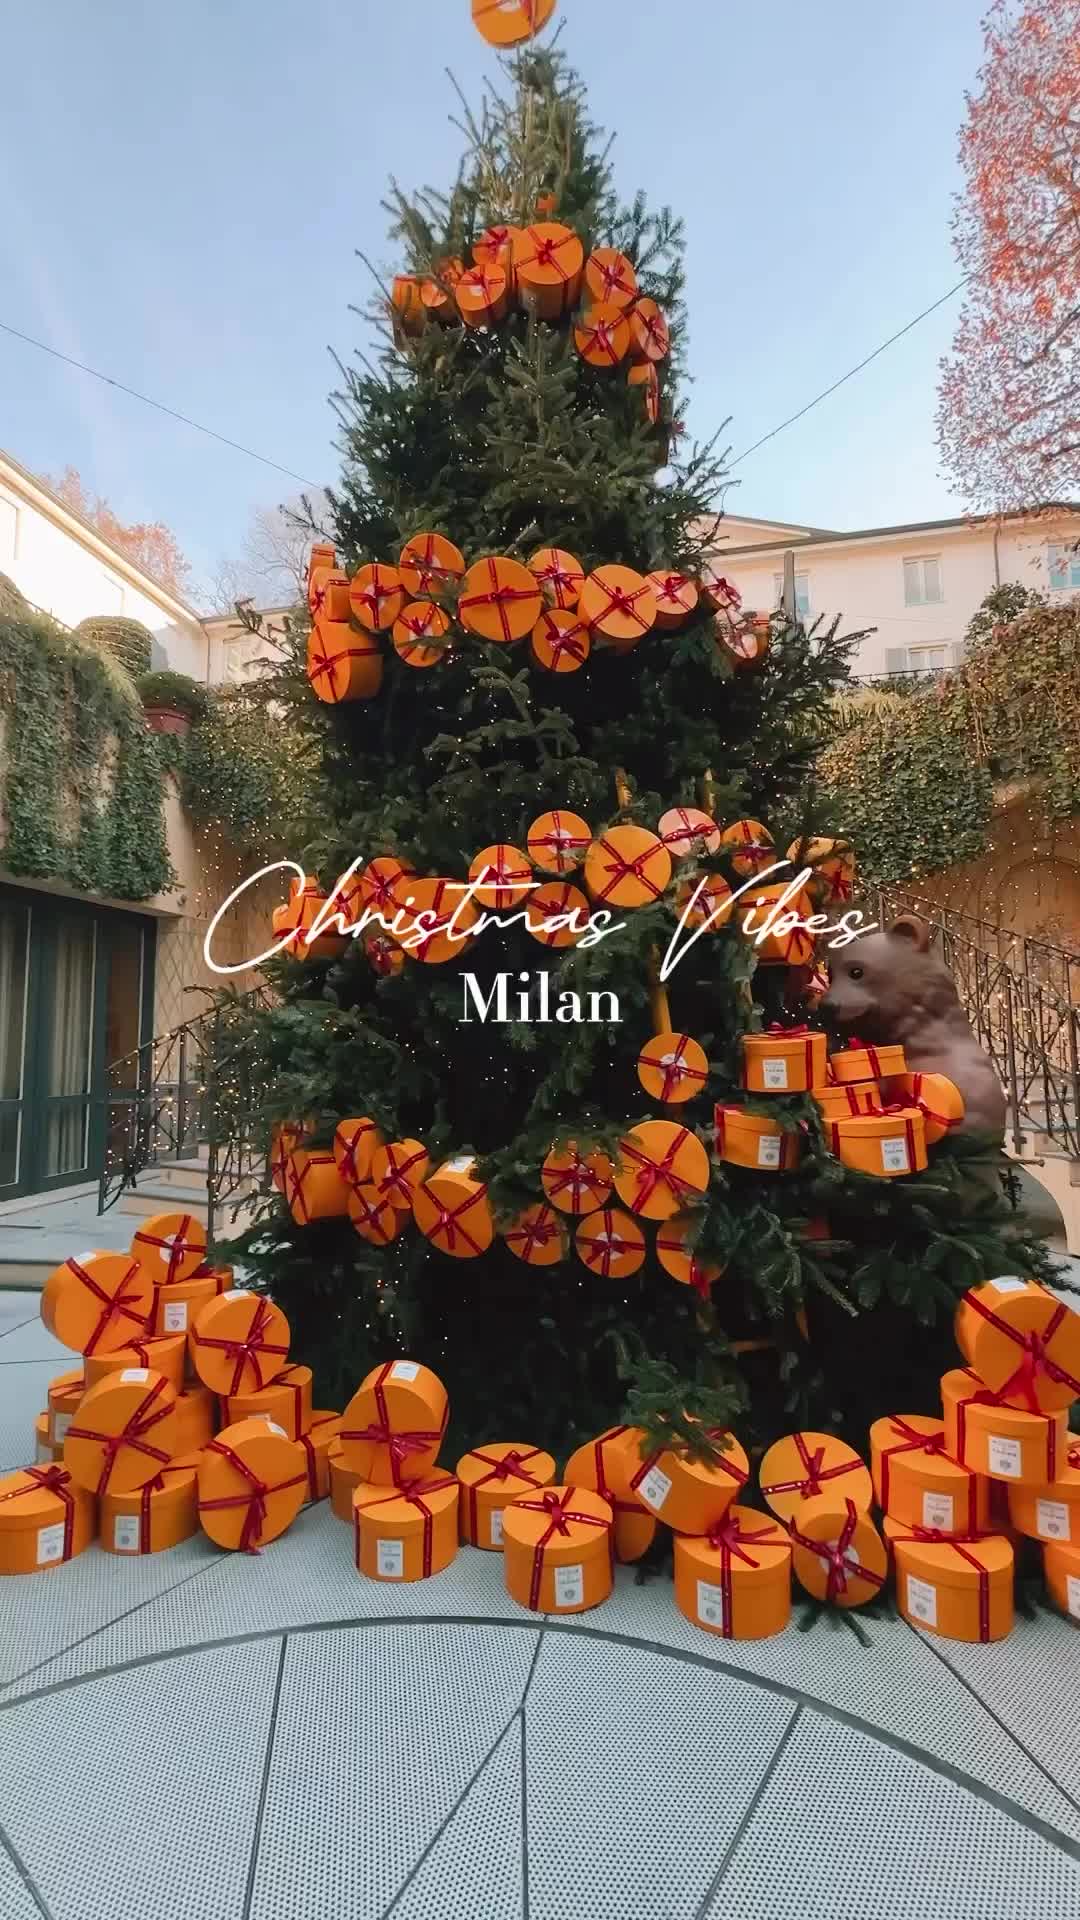 Xmas Vibes in Milan: Top Attractions Nearby